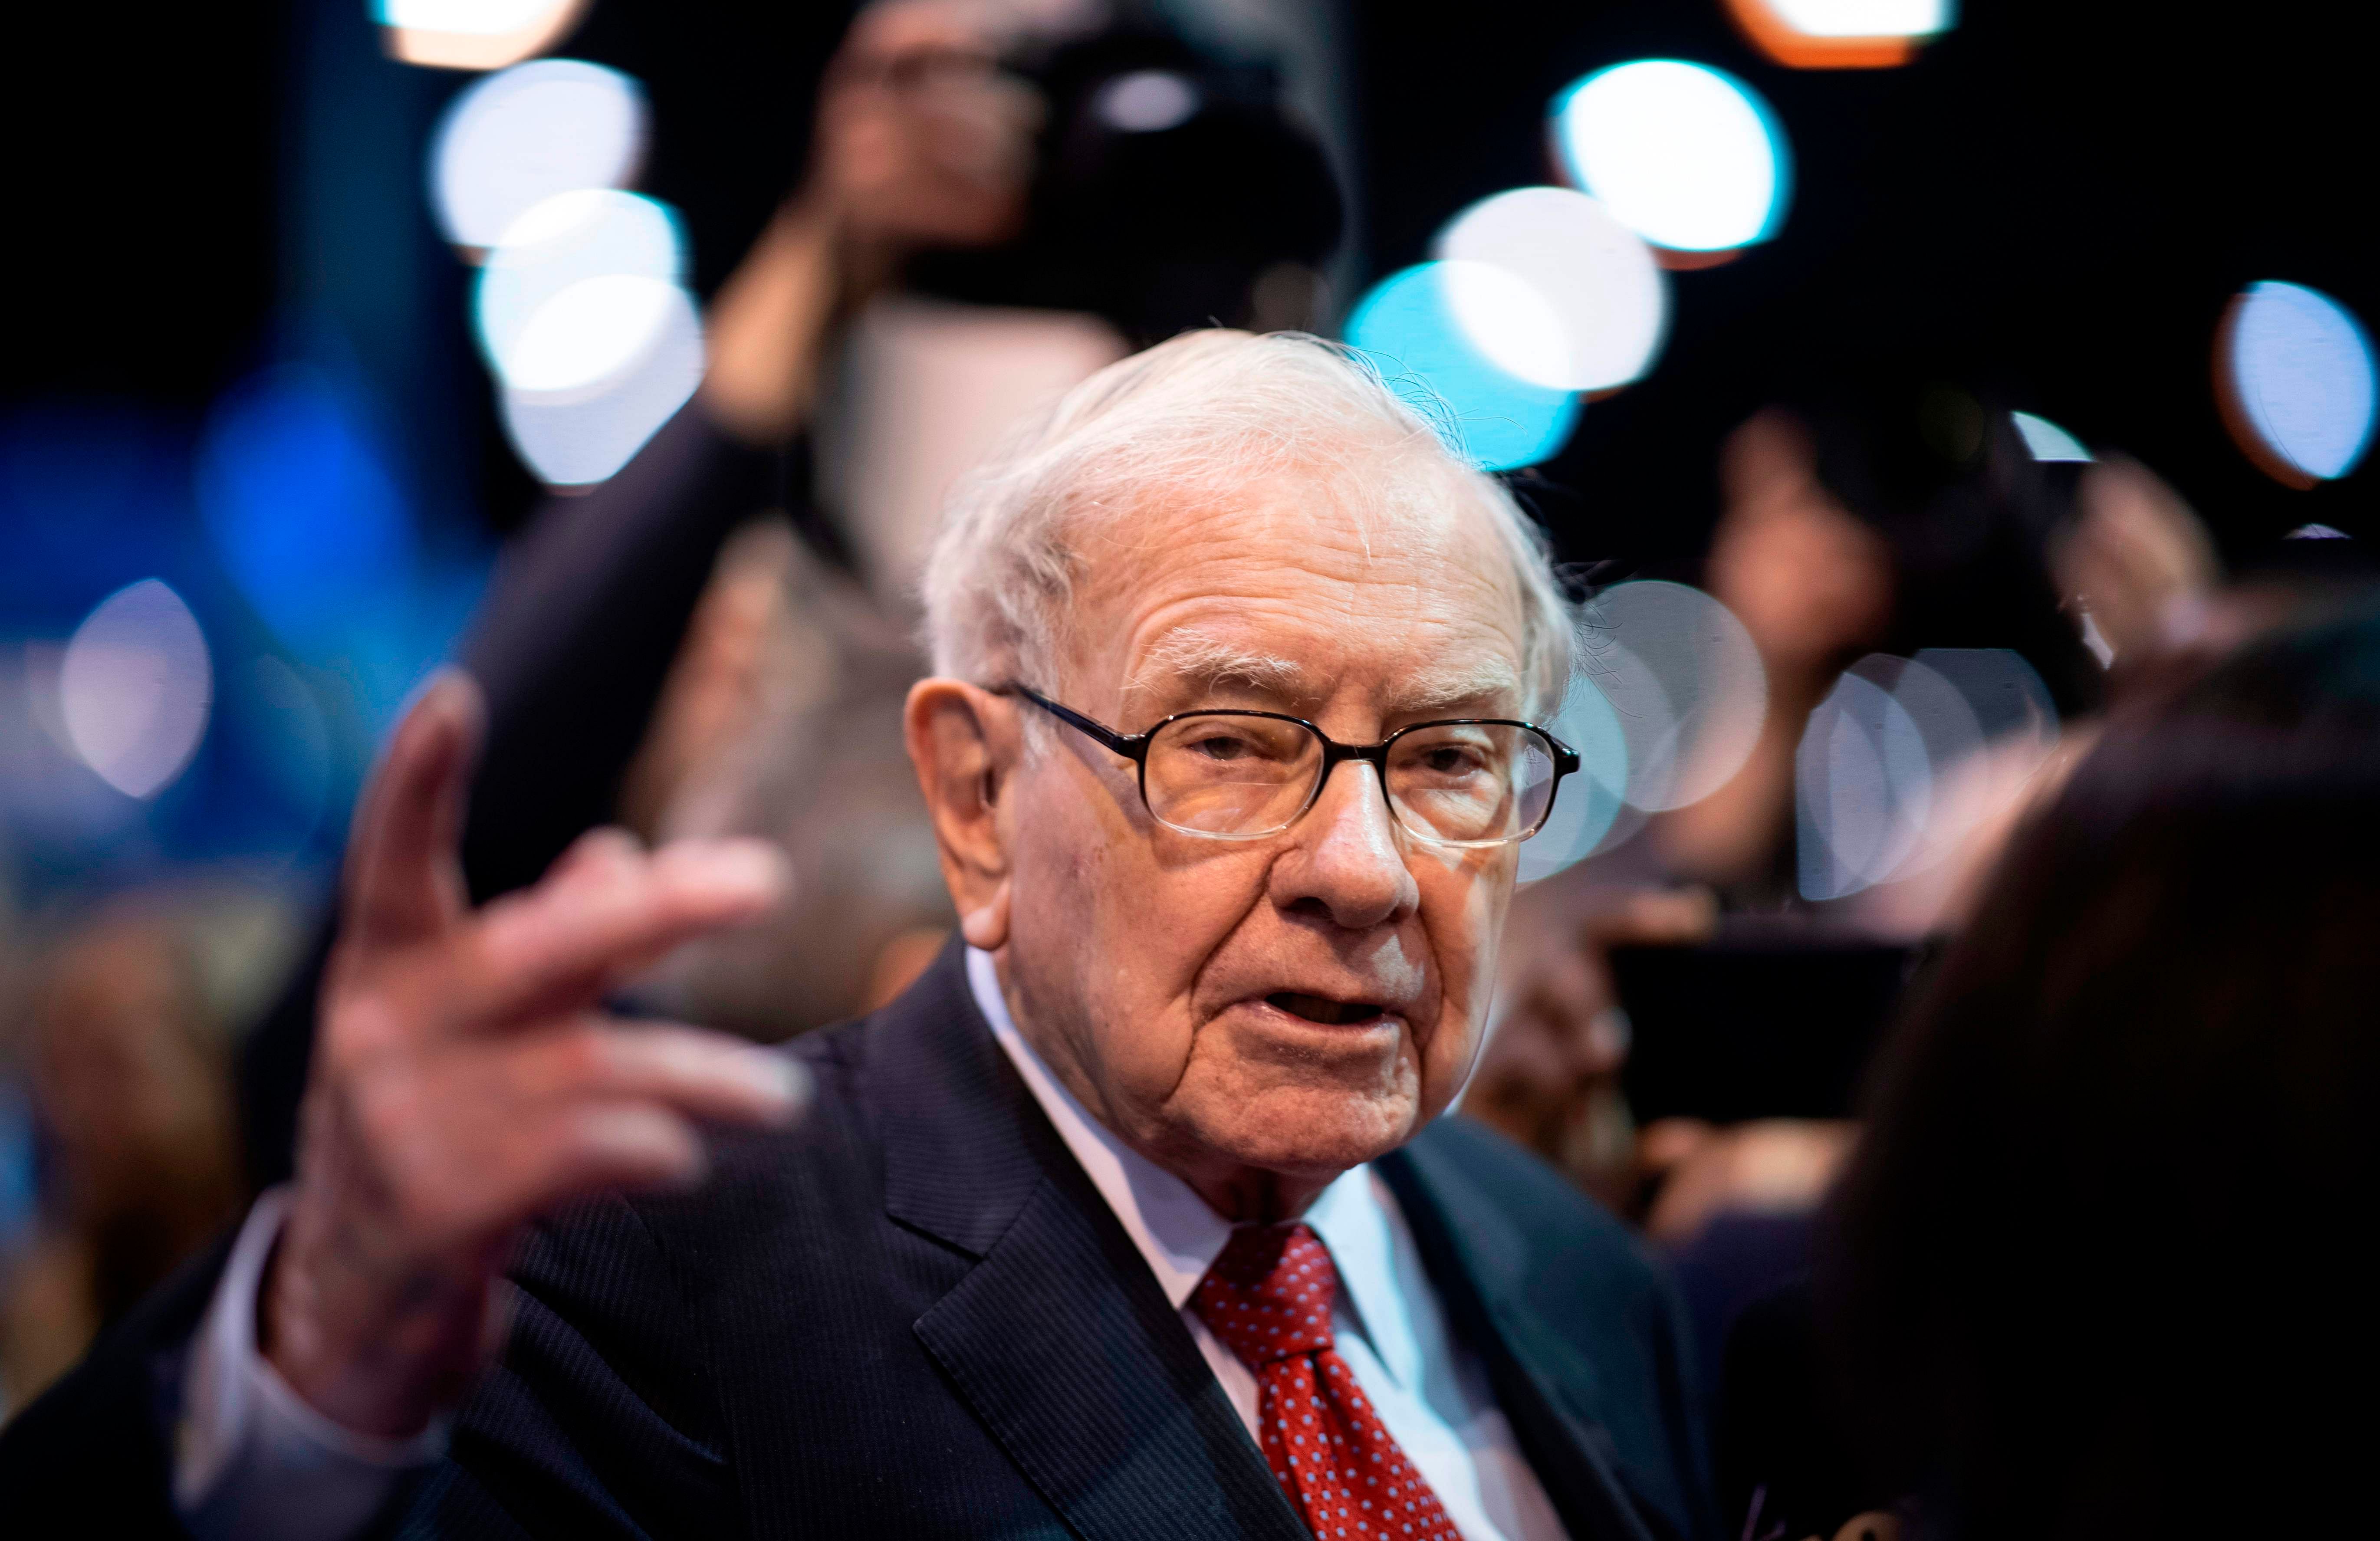 Buffett said the potential impact of the pandemic, which has already battered the global economy, had a "extraordinarily wide" range. (Credit: AFP Photo)